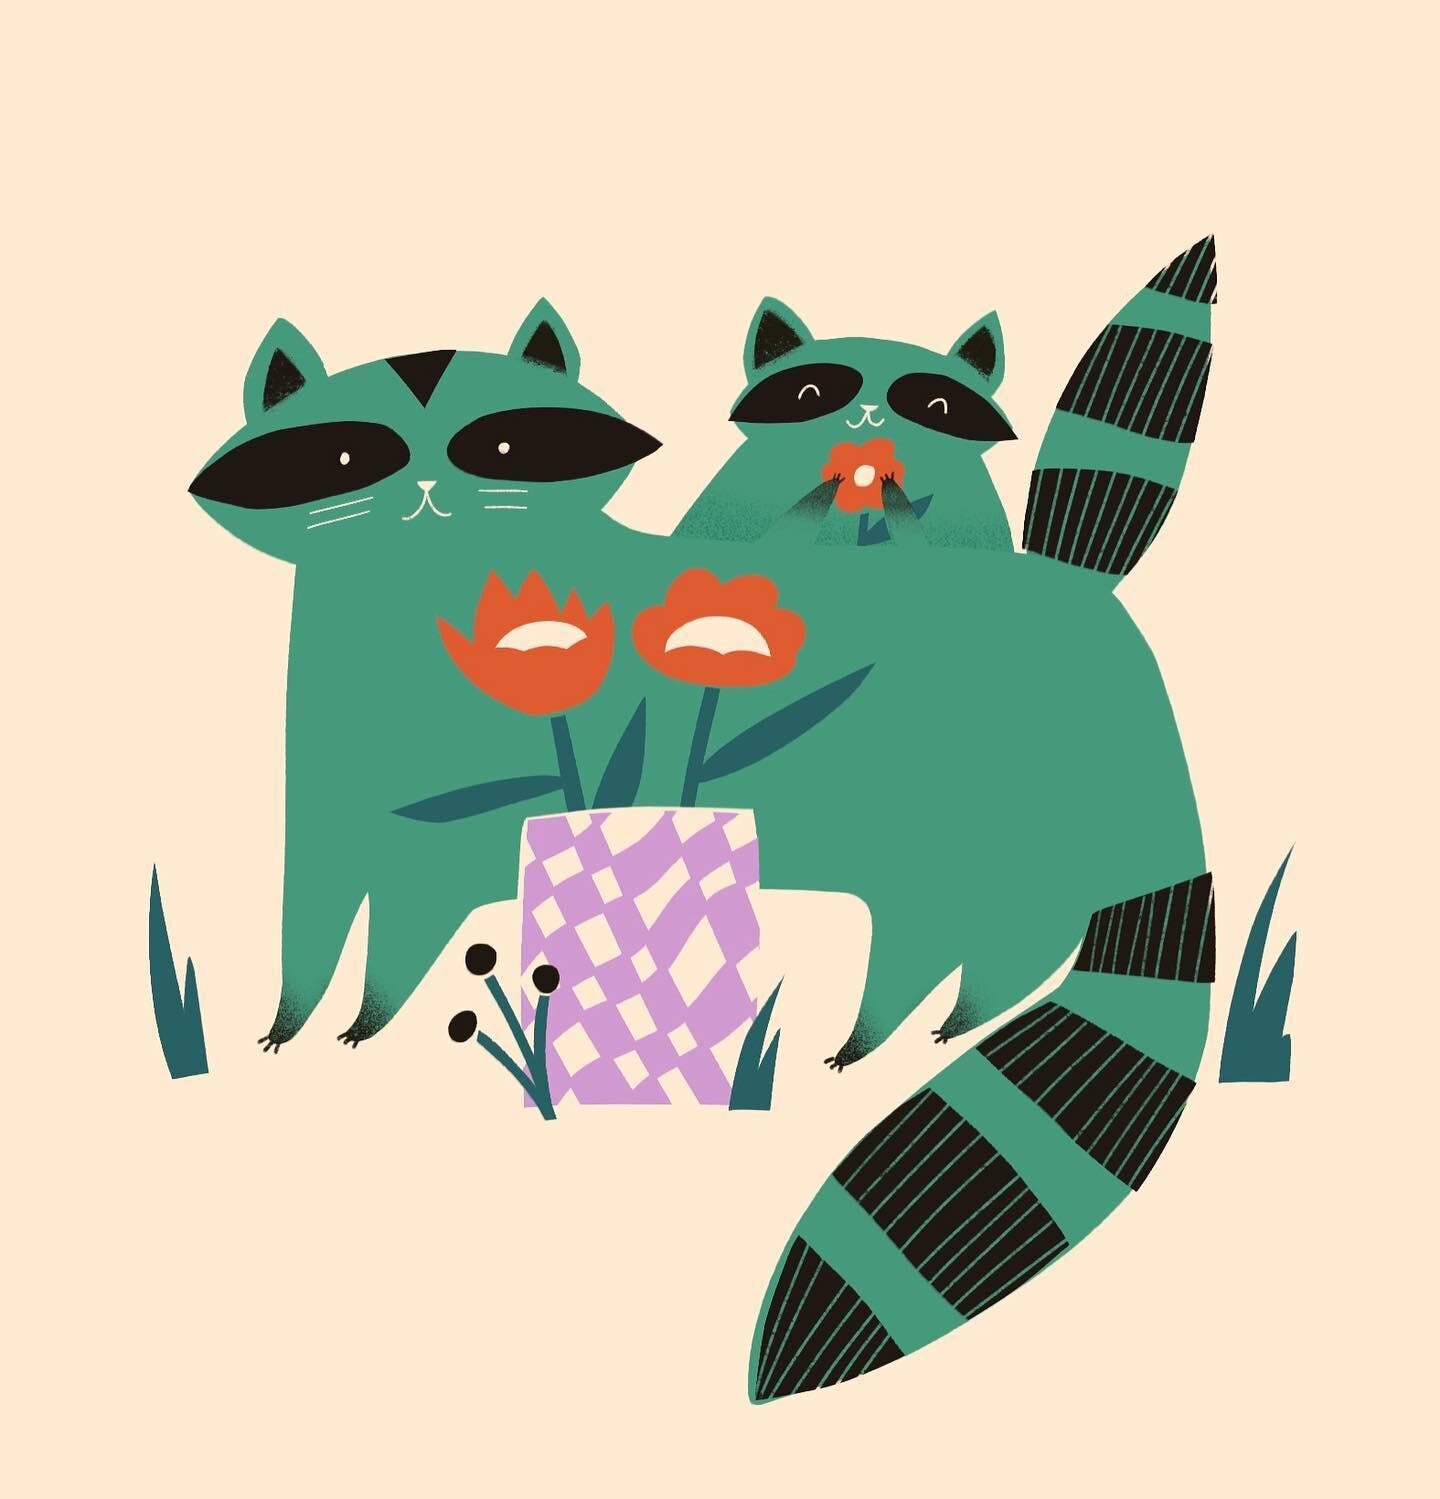 I forgot about this cute lil racoon family! Those paws really get me. 🦝🌼

#childrenillustration #kidsillustration #cuteillustration #womenofillustration #illustrationartists #illustratorsoninstagram